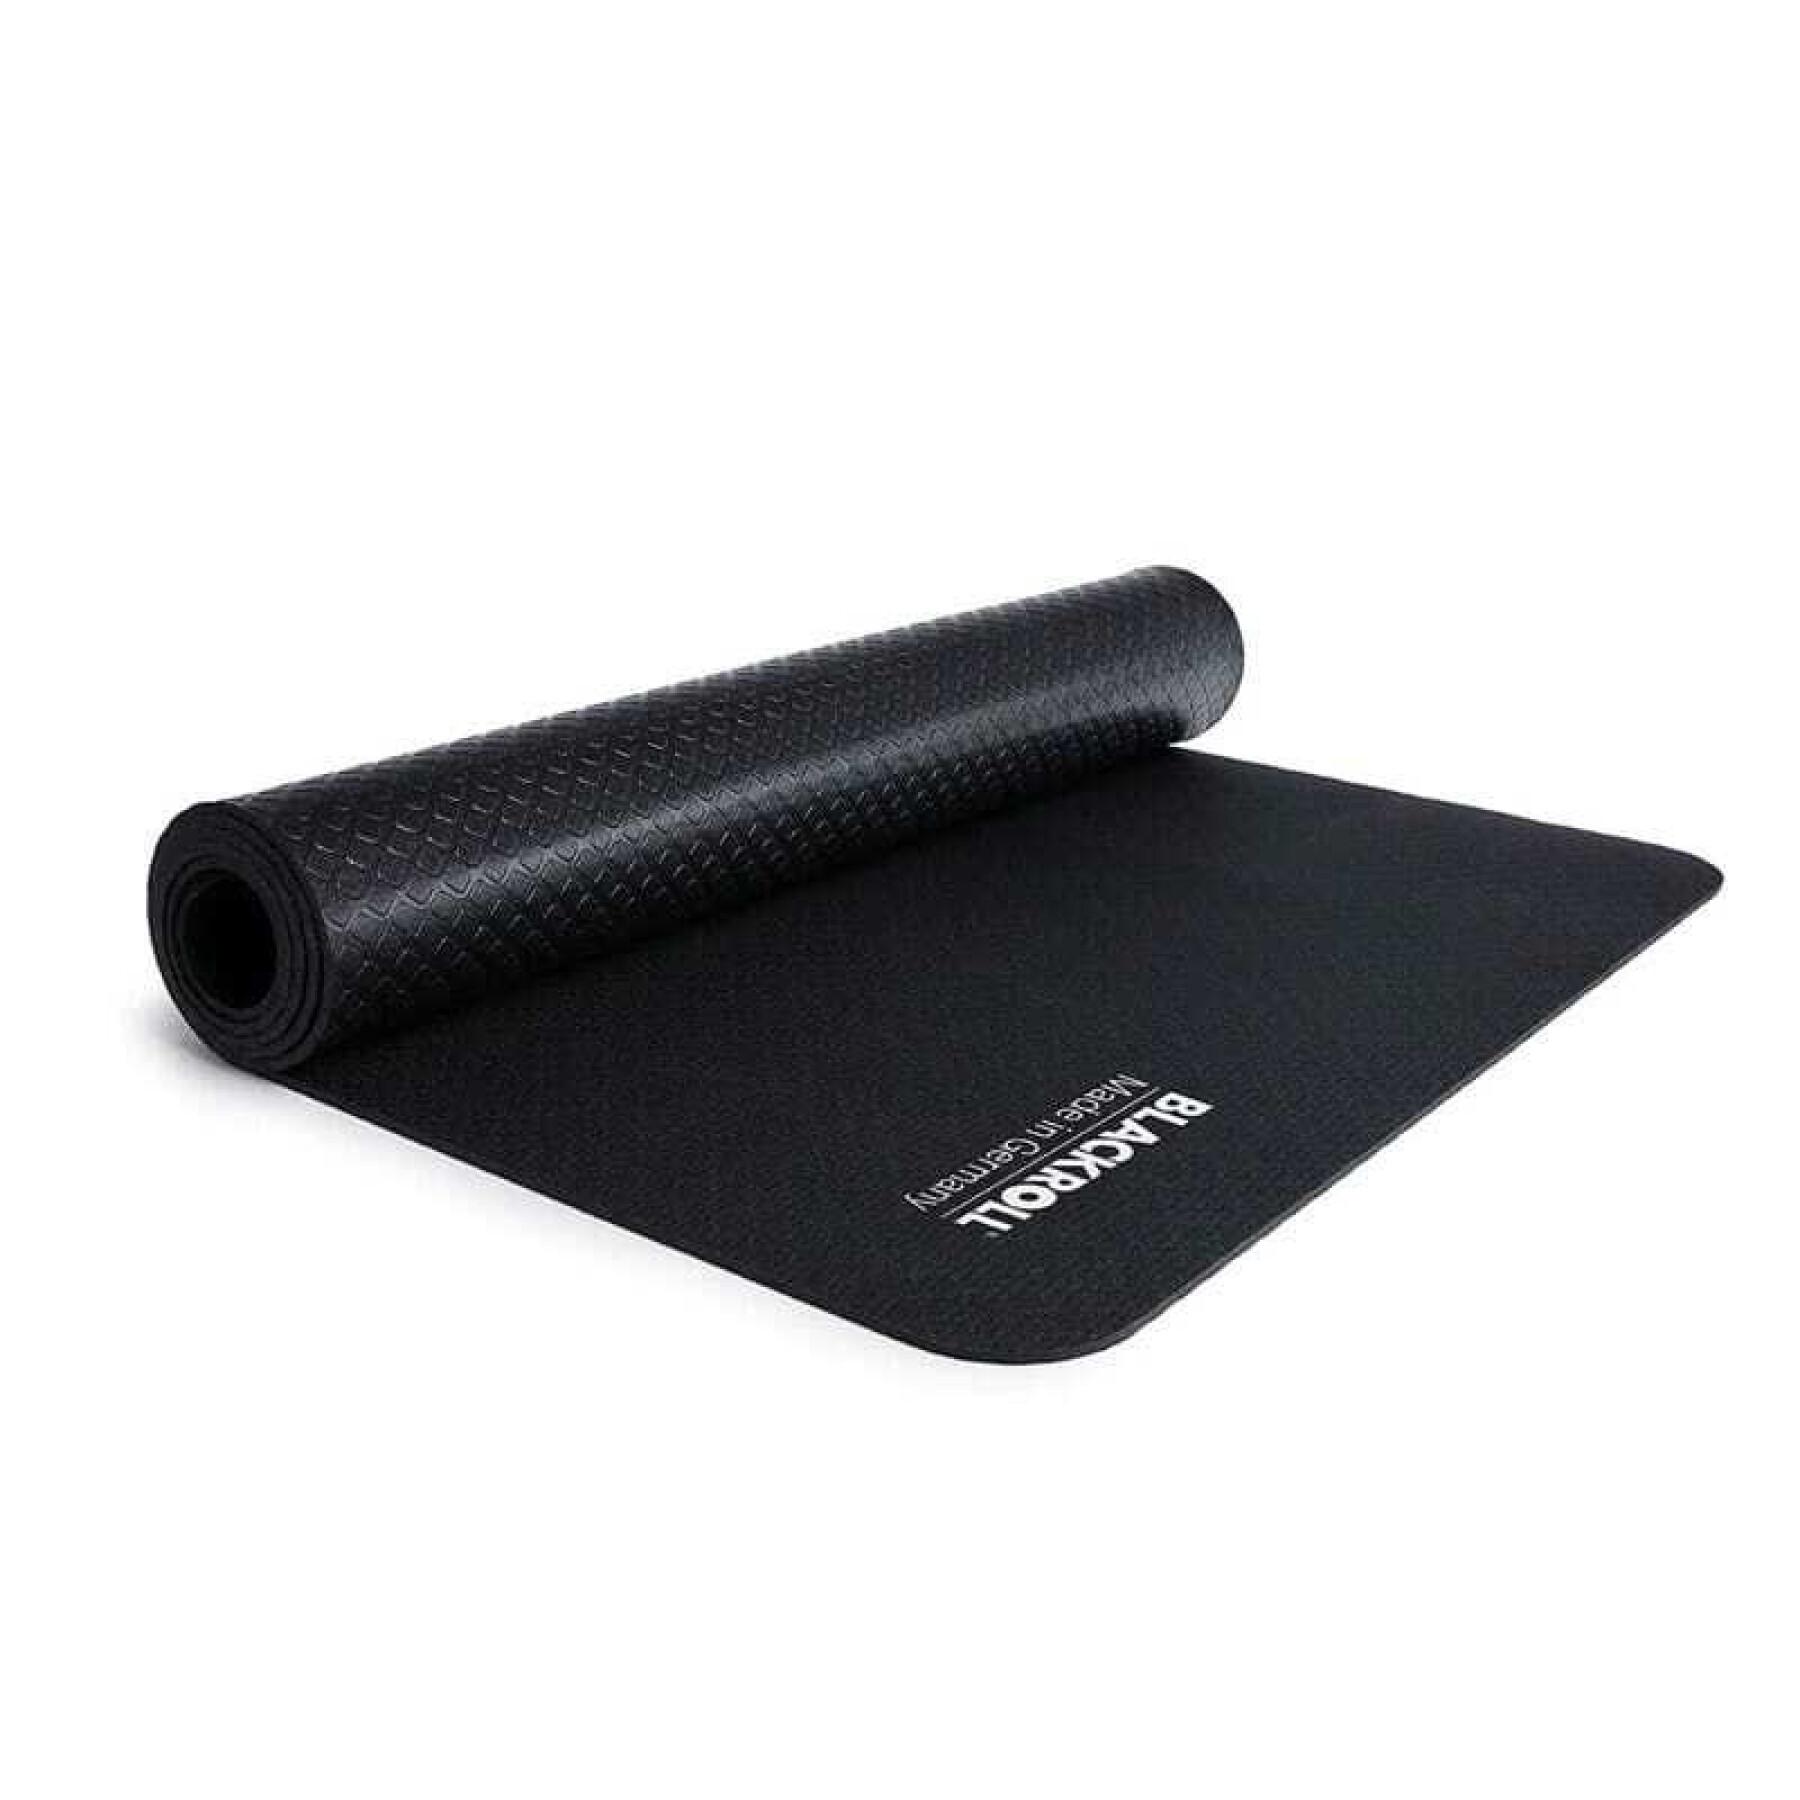 Training mat with gymbag Blackroll